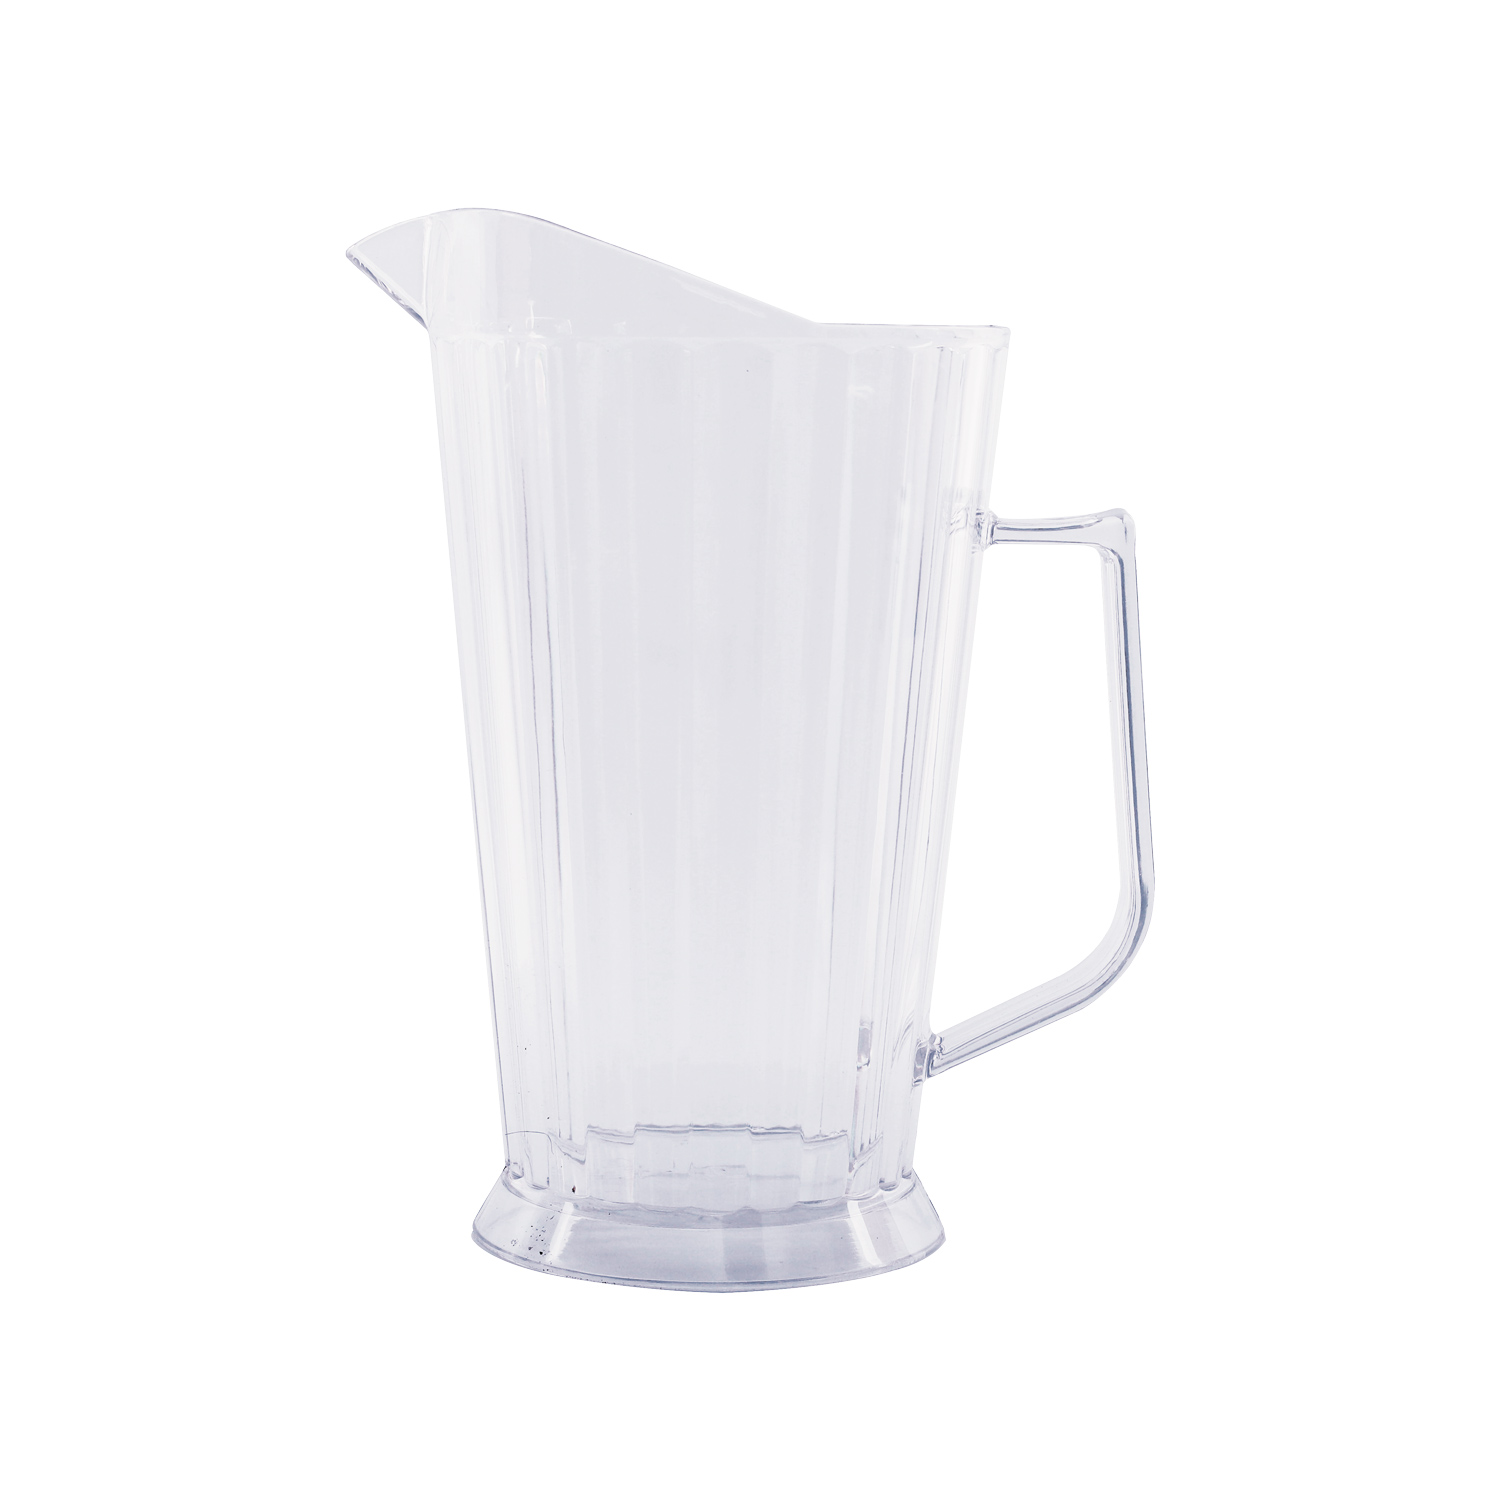 CAC China WPBR-61C Clear Polycarbonate Beverage/Beer Pitcher 60 oz.